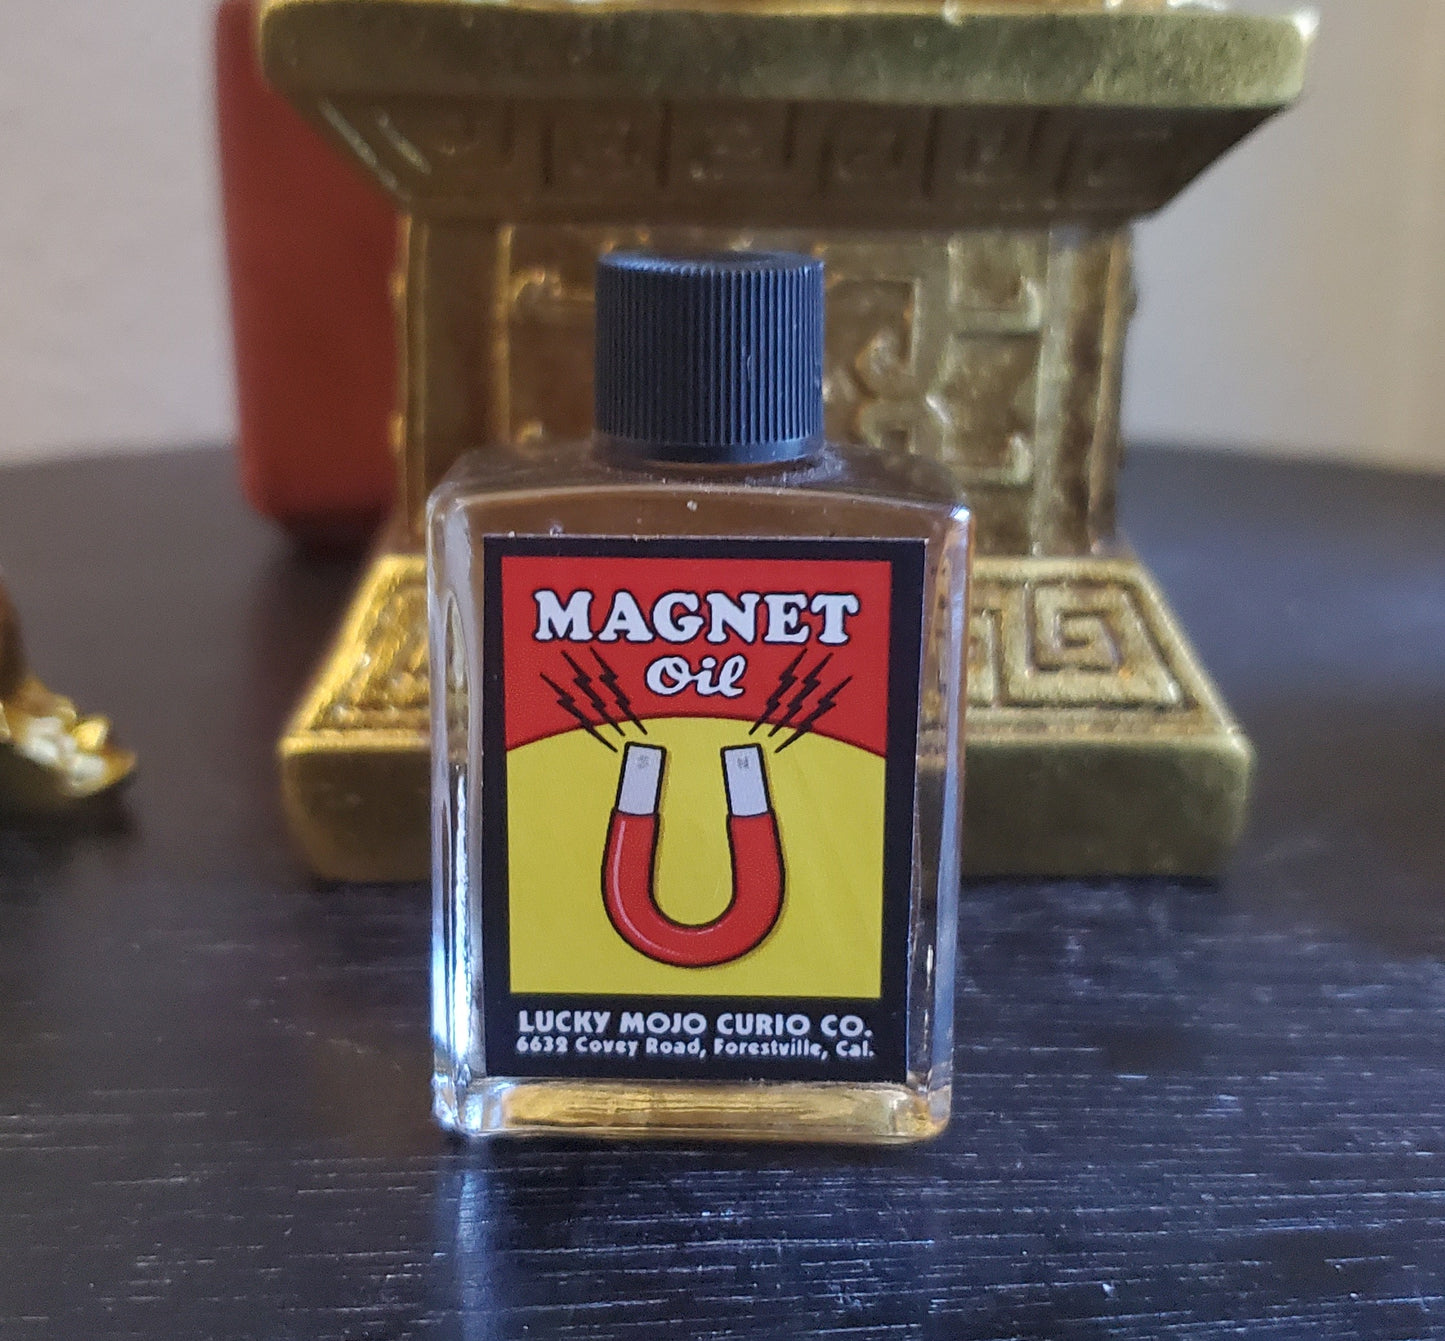 LuckyMojoCurioCo "Magnet" Anointing / Conjure Oil #GreatDeal #LuckyMojoCurioCo #LuckyMojo #EffectiveOils #MustHave